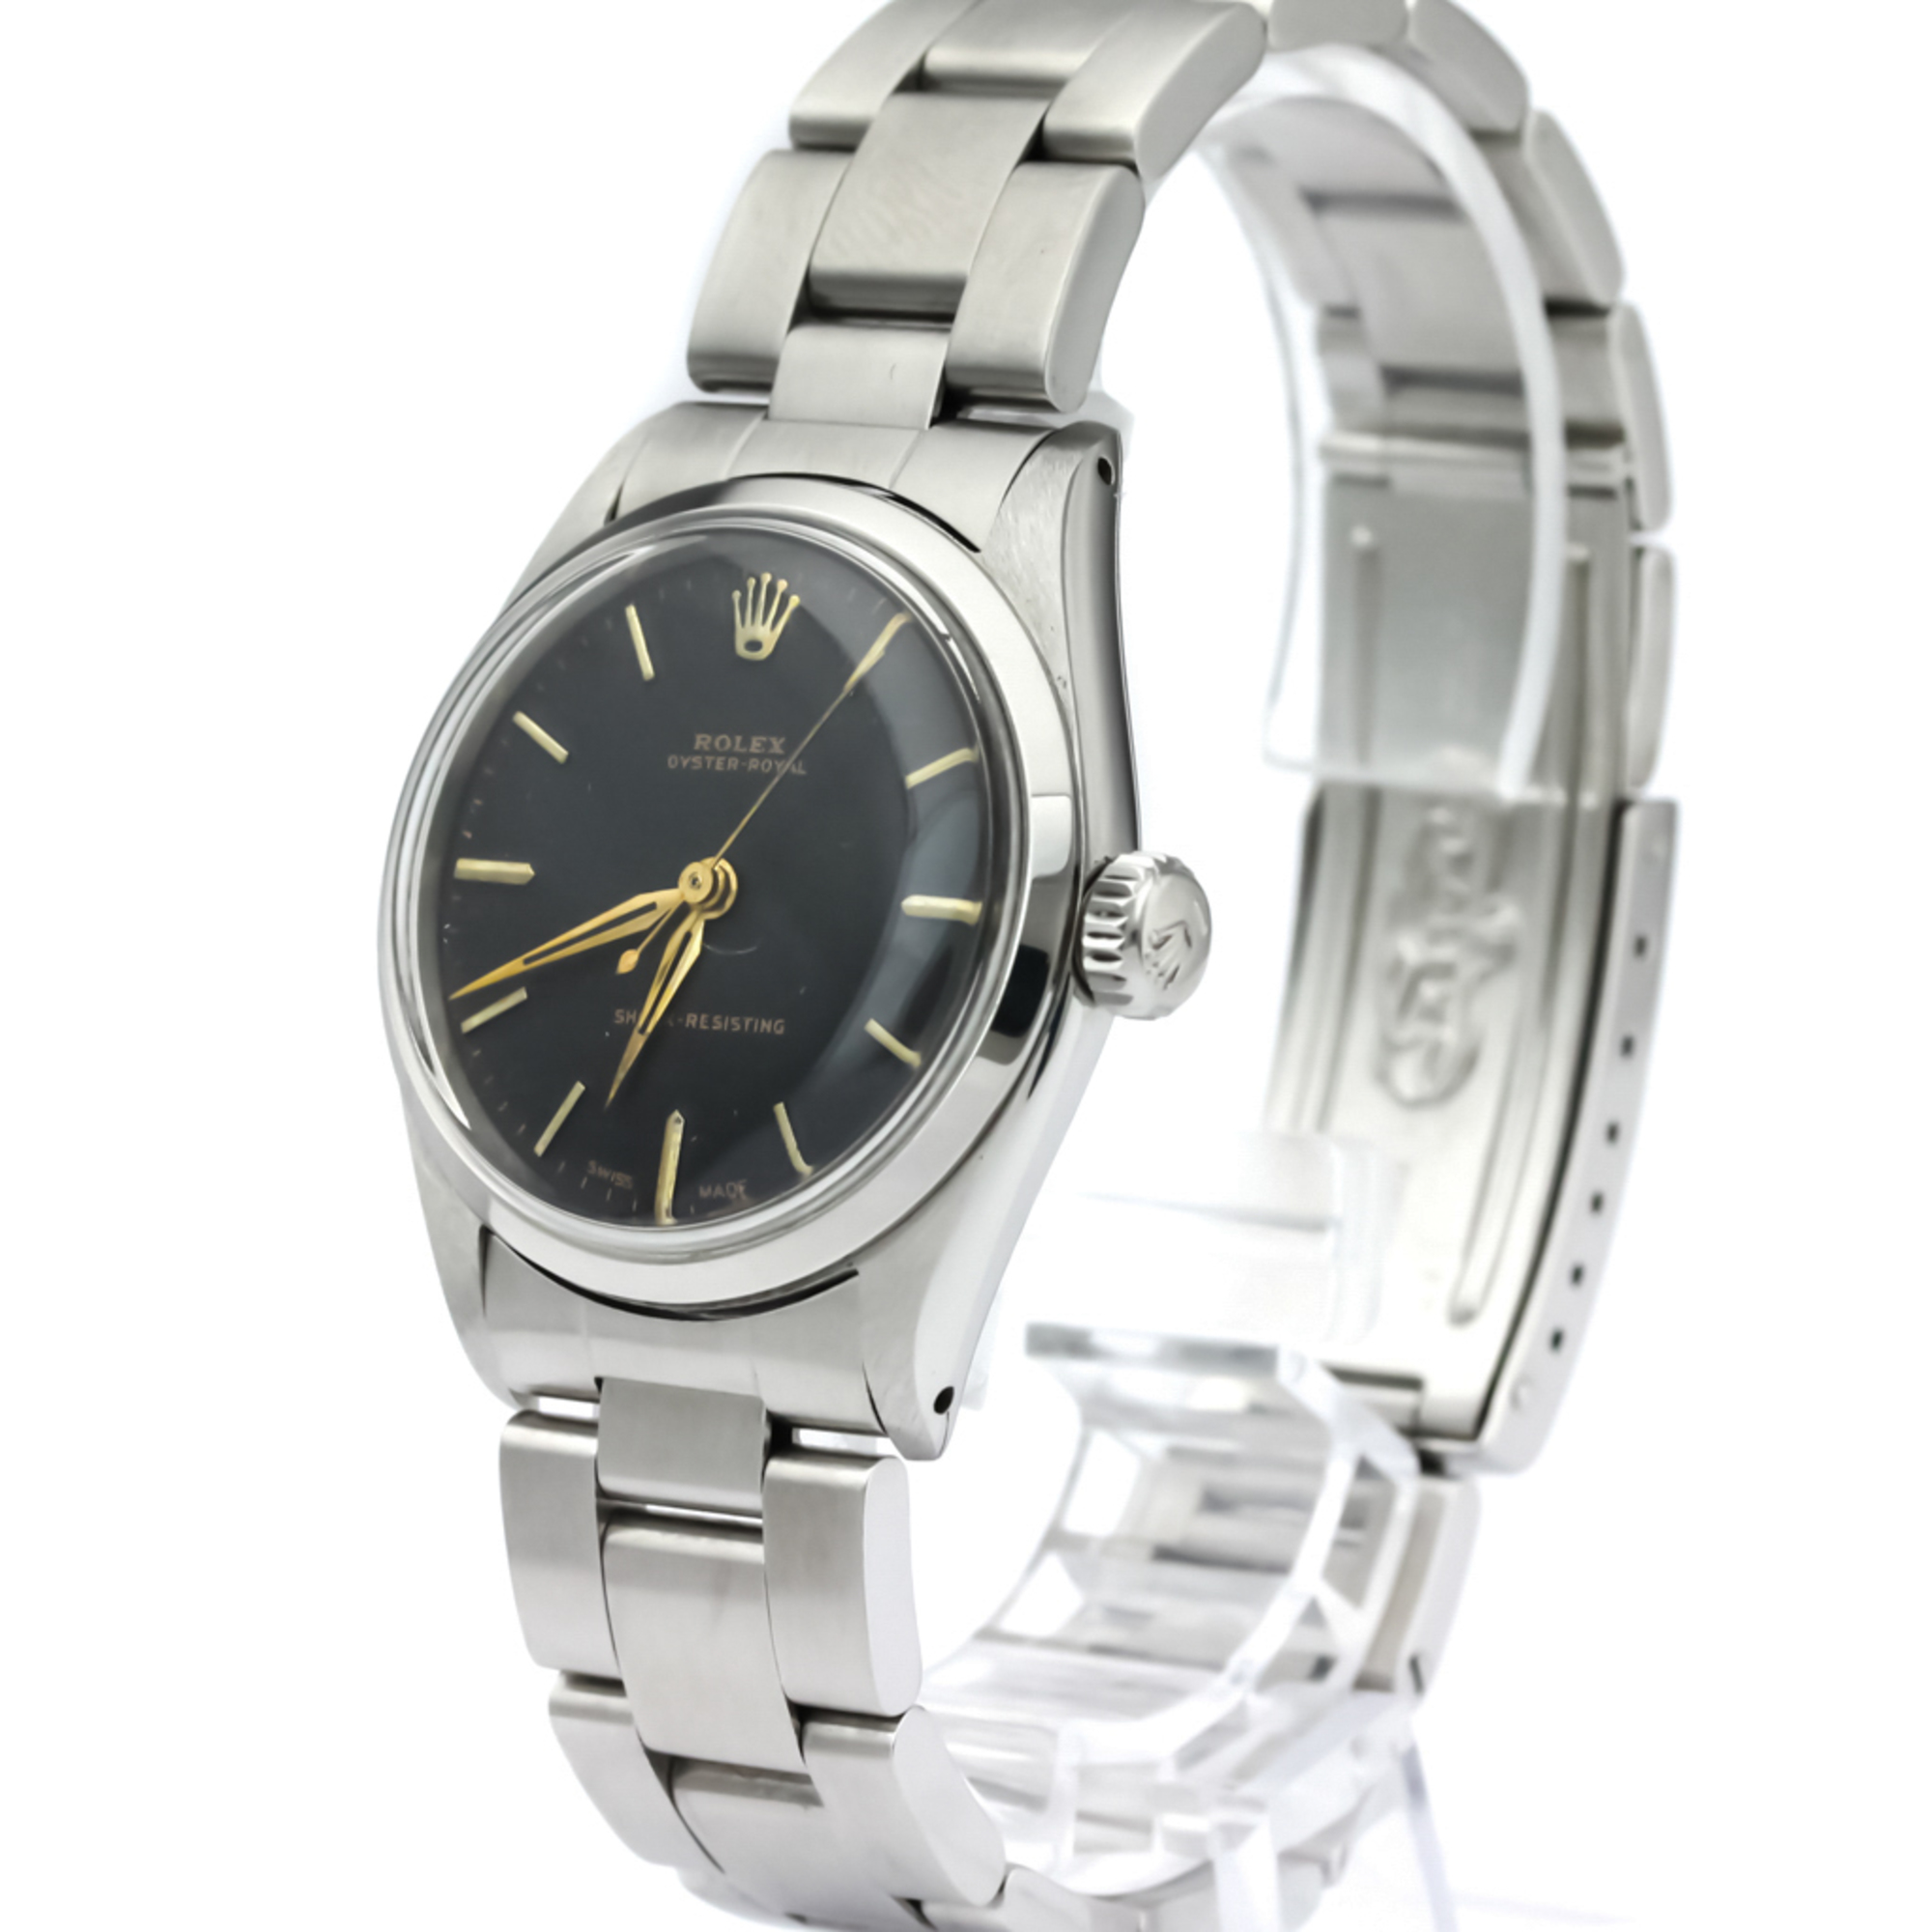 Rolex Oyster Royal Mechanical Stainless Steel Unisex Dress Watch 6444